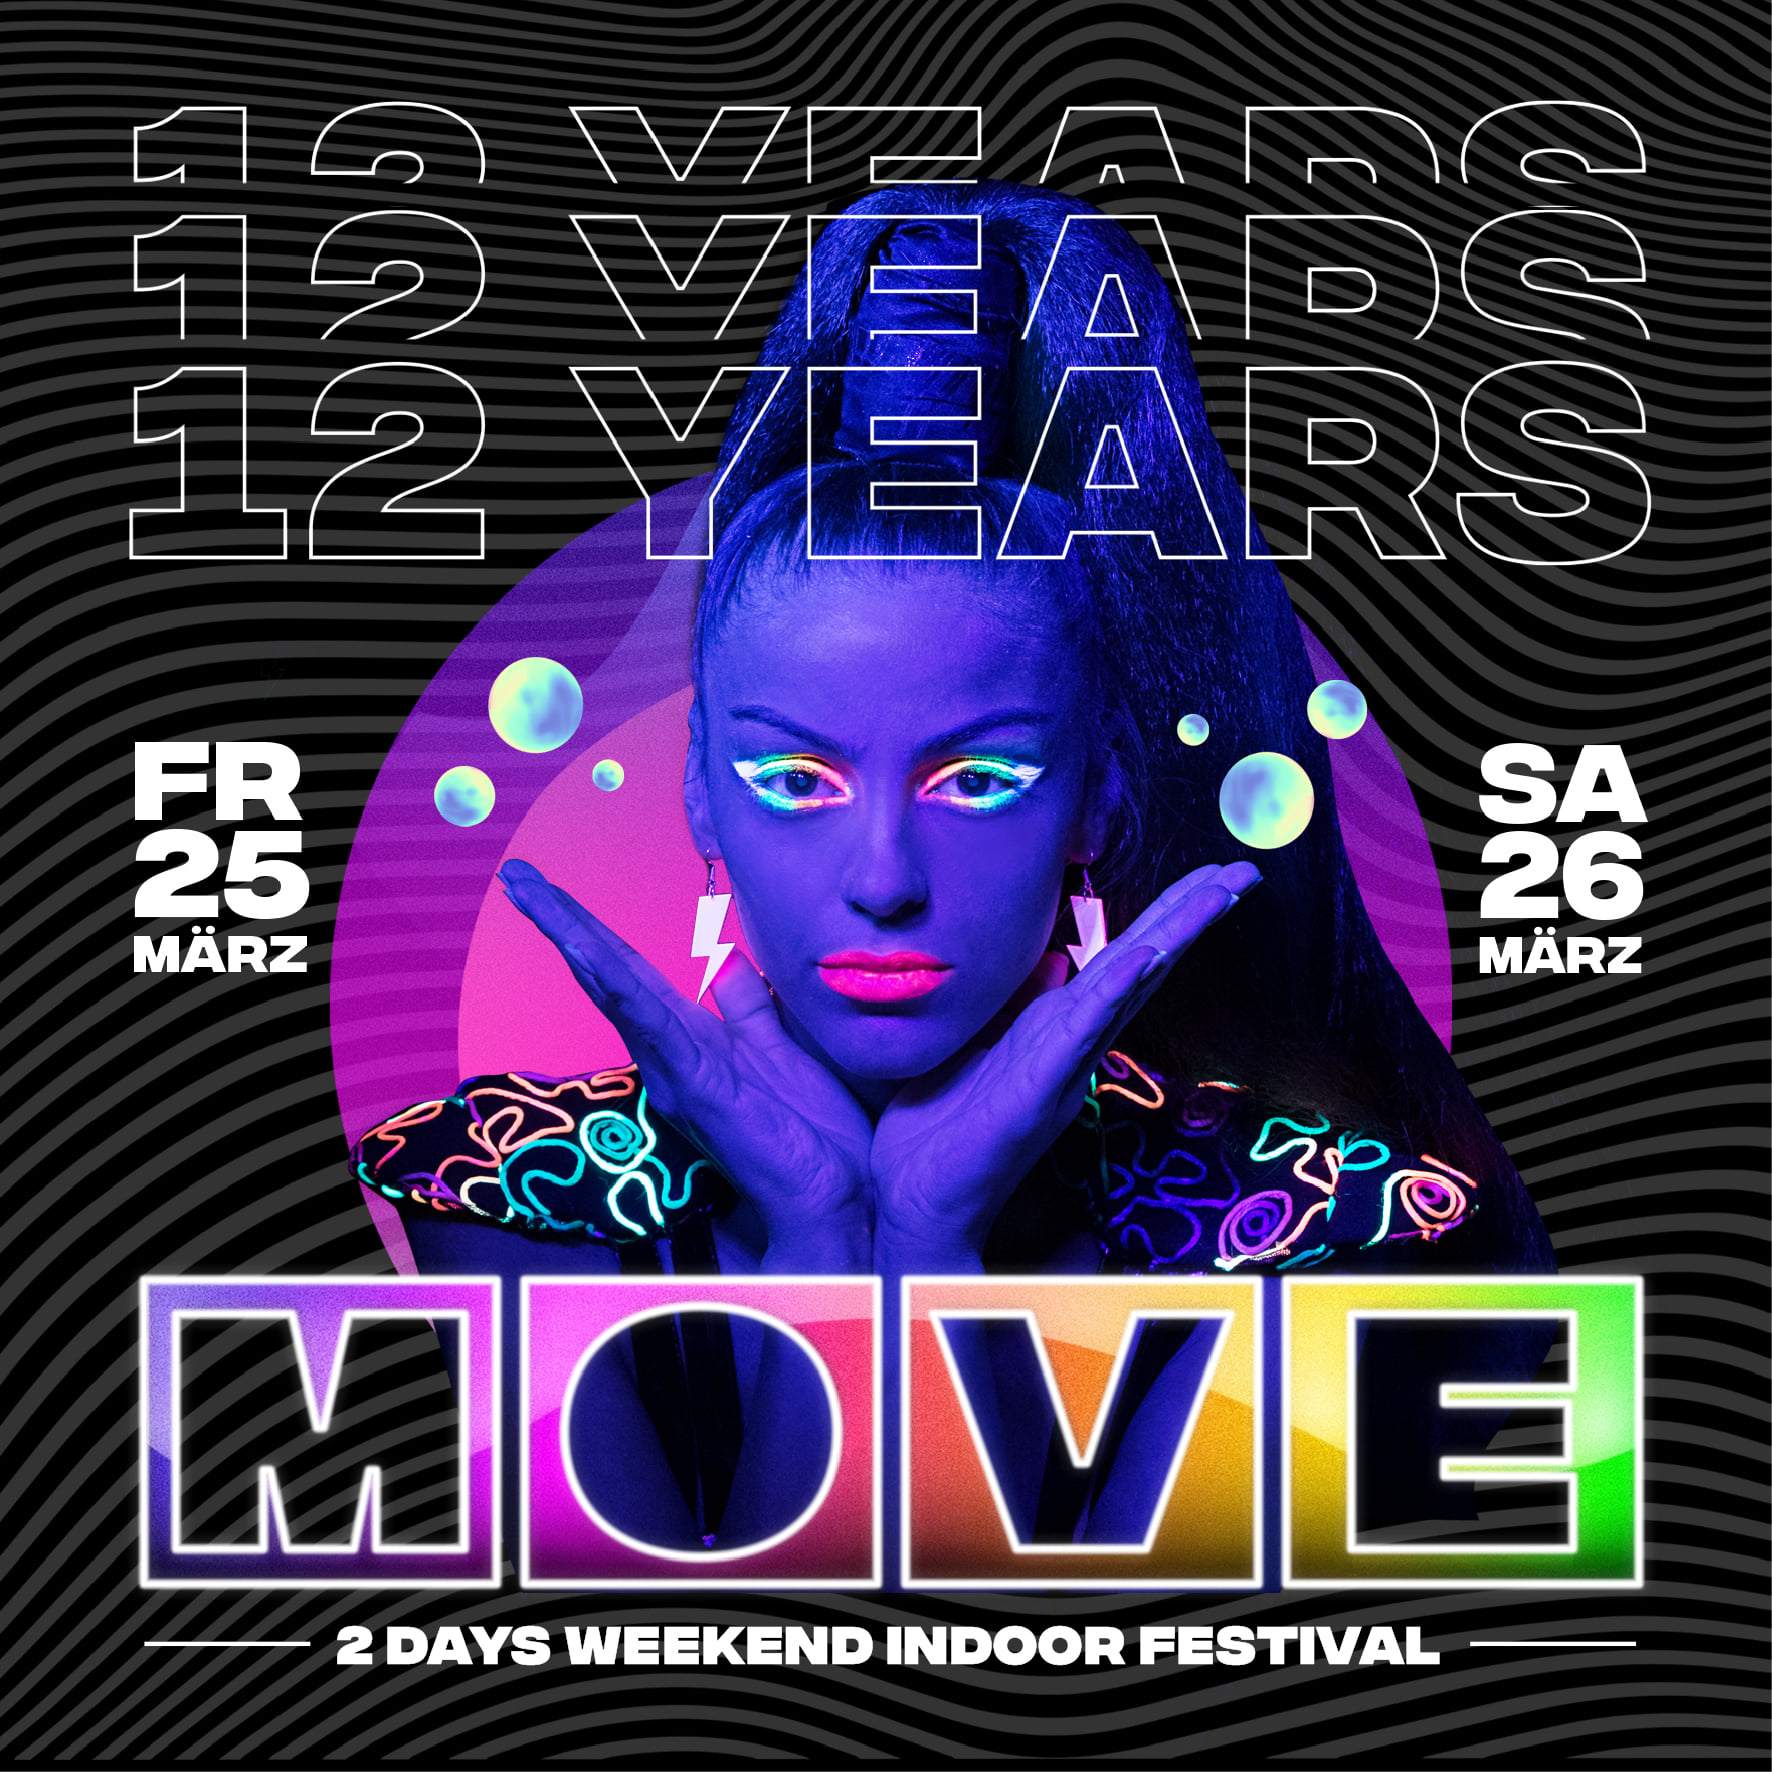 MOVE - 12 Years - 2 Days Wknd Indoor Festival - フライヤー表